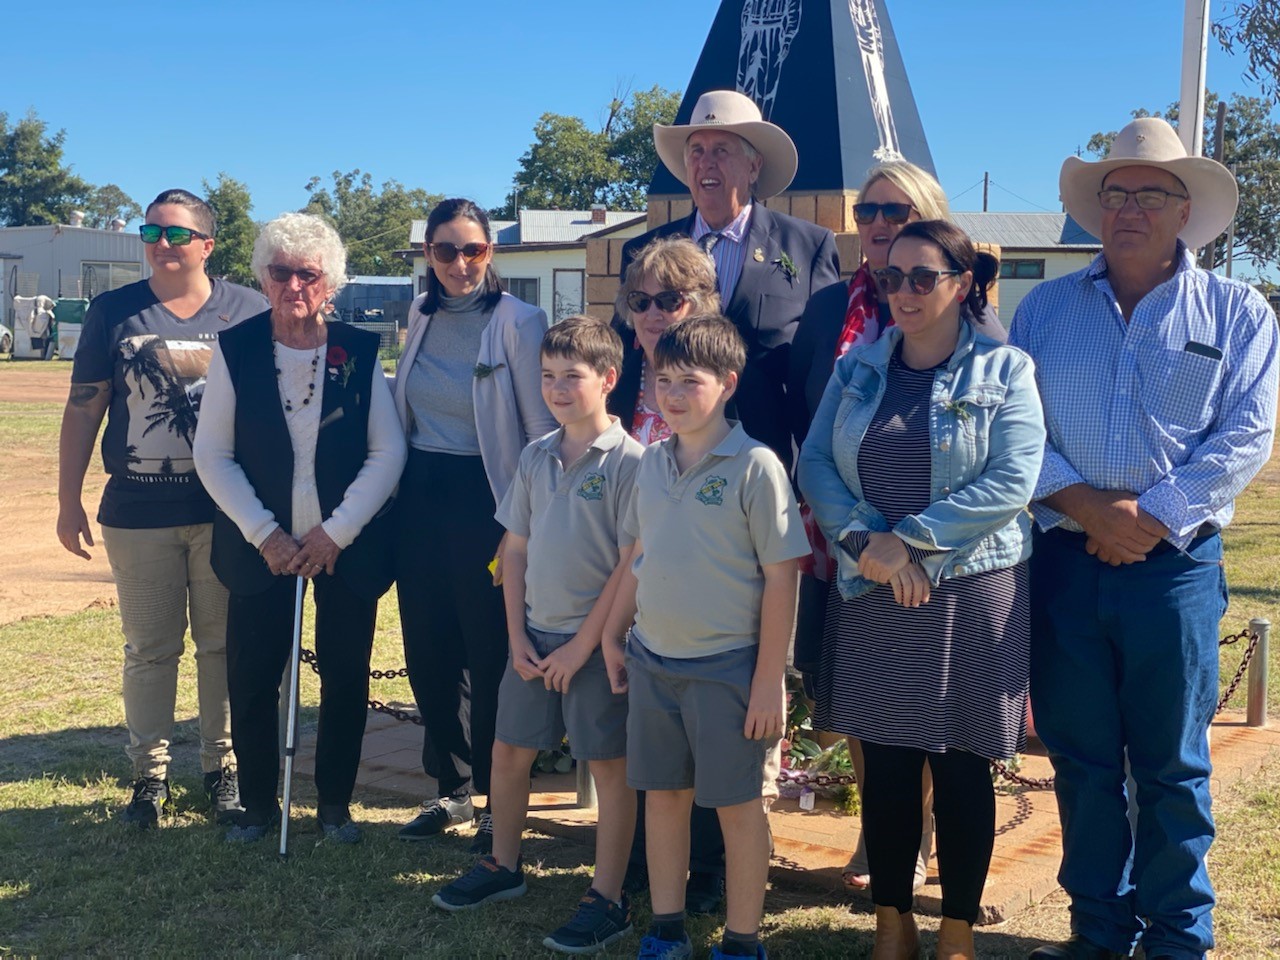 Back, left to right, at the Pilliga commemoration, Brittney Phillips, Betty Galagher, Casey Zell, Wayne Galagher, Donna Phillips, Max Phillips, middle, Sally Phelps, Donna Irene Phillips, front, twins Zac and Nigel Phillips.